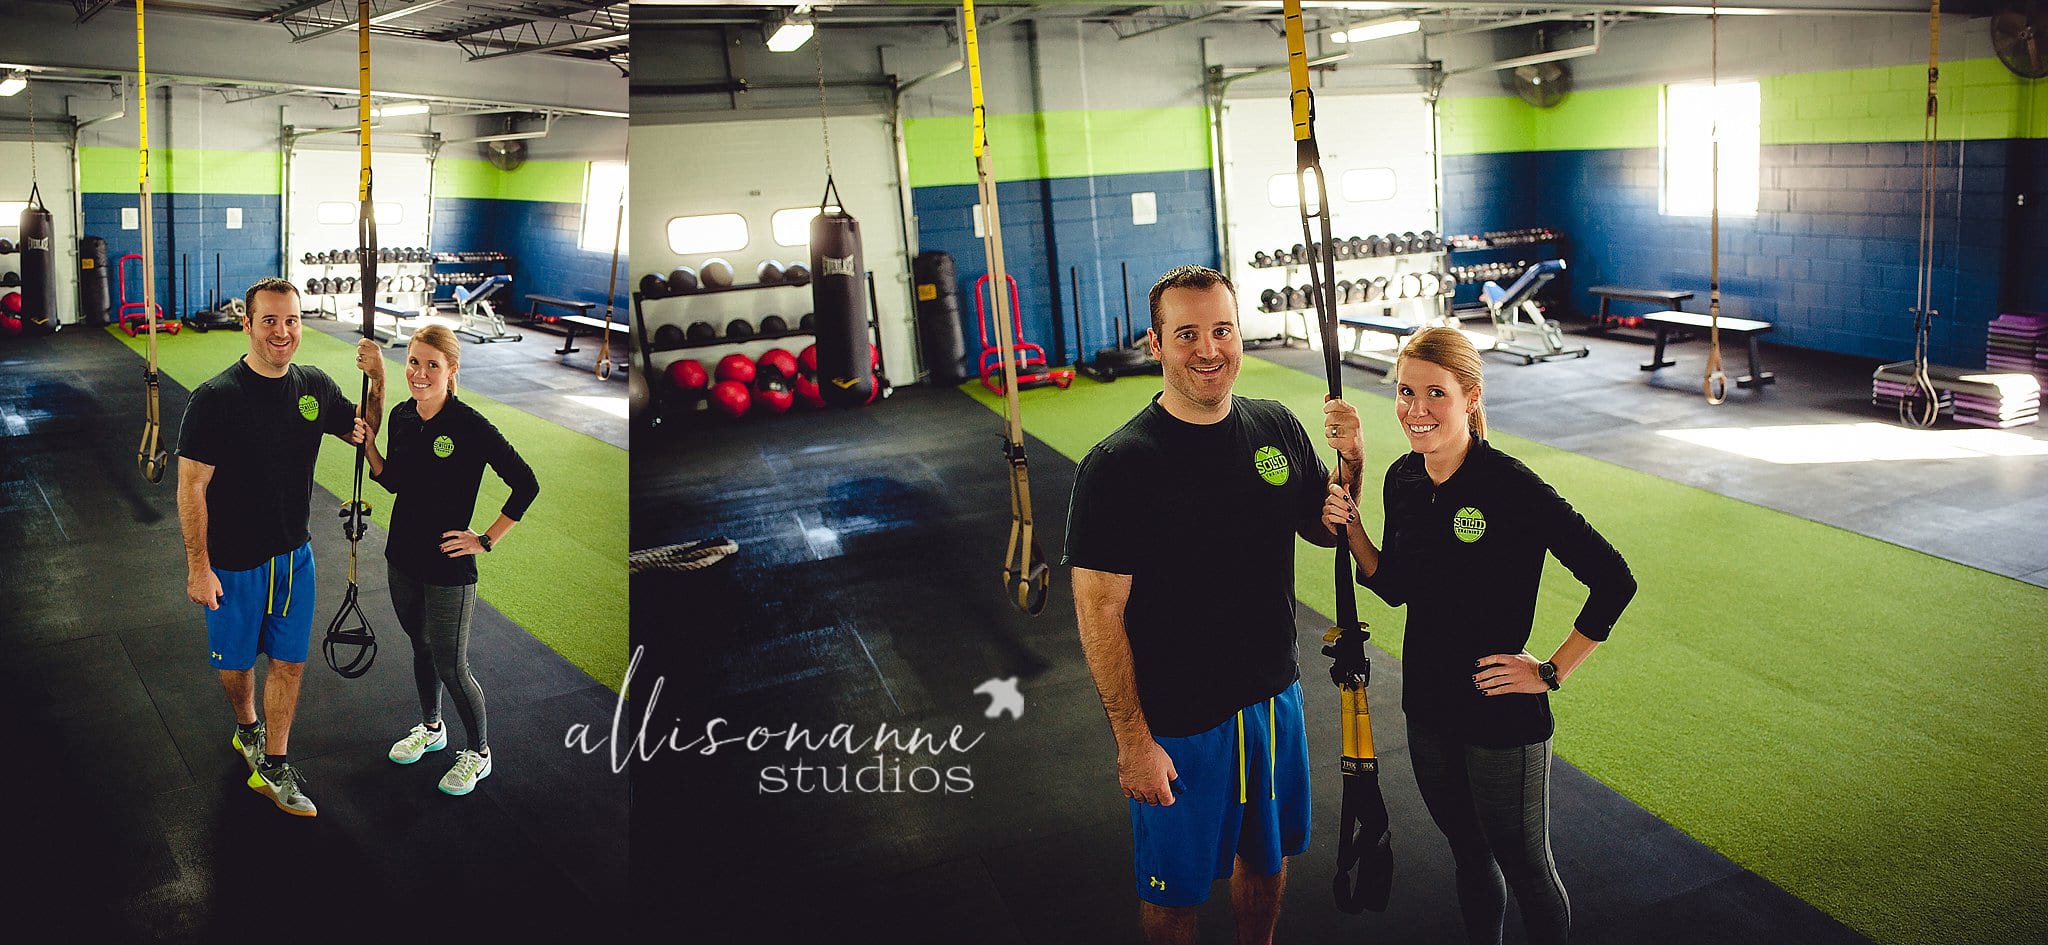 SOLID Training, personal trainers, fit mom, best gym South Jersey, positive energy, circuit classes, Instagram, fitness is happiness, #traintobesolid, strong body strong mind, AllisonAnne Studios, Hammonton